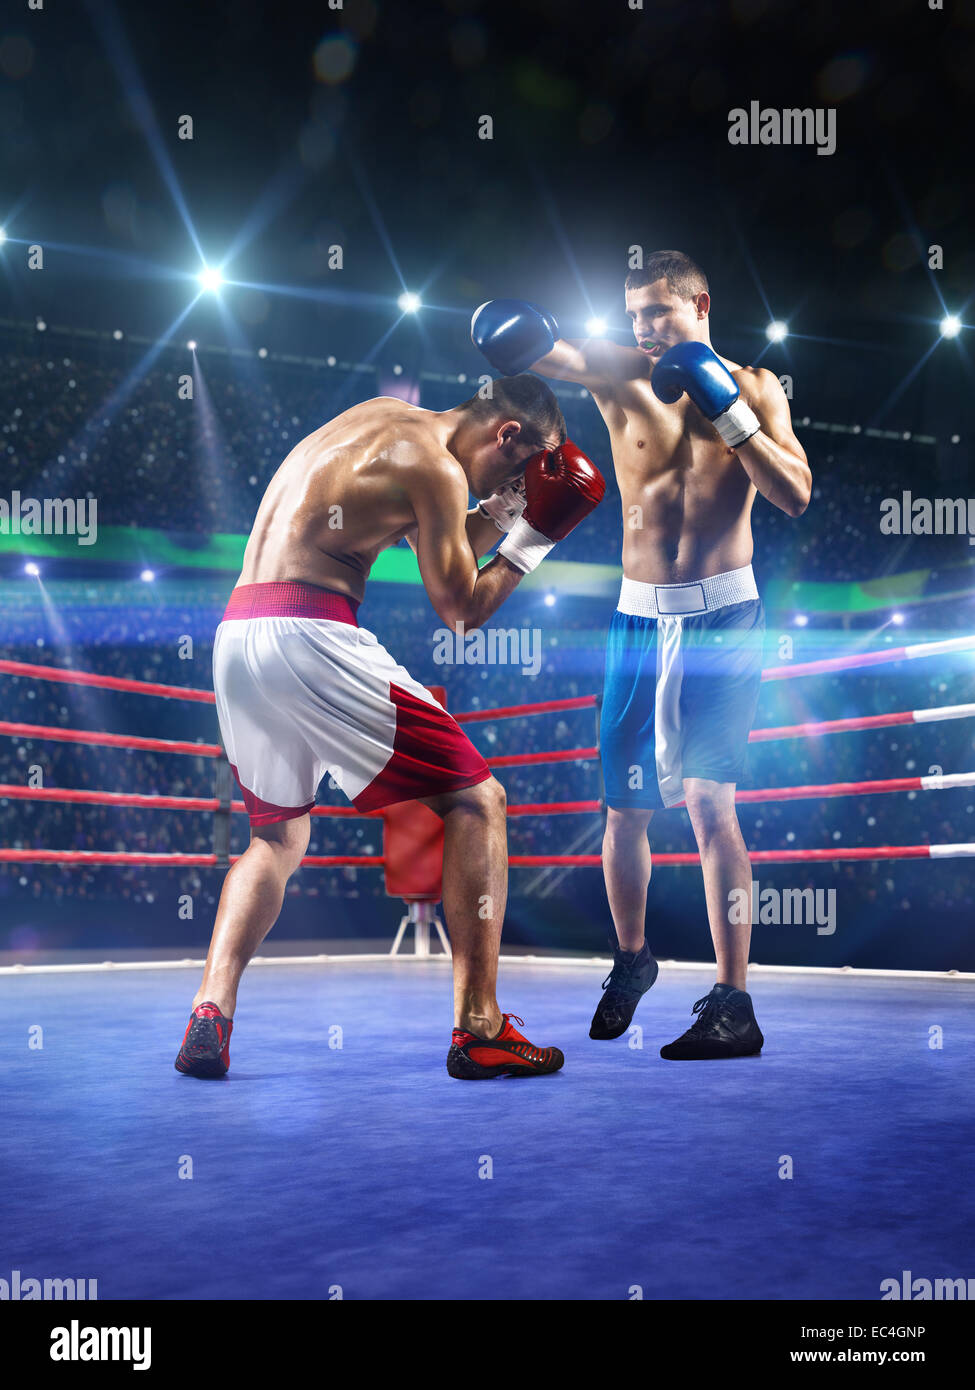 Two professionl boxers are fighting on arena Stock Photo